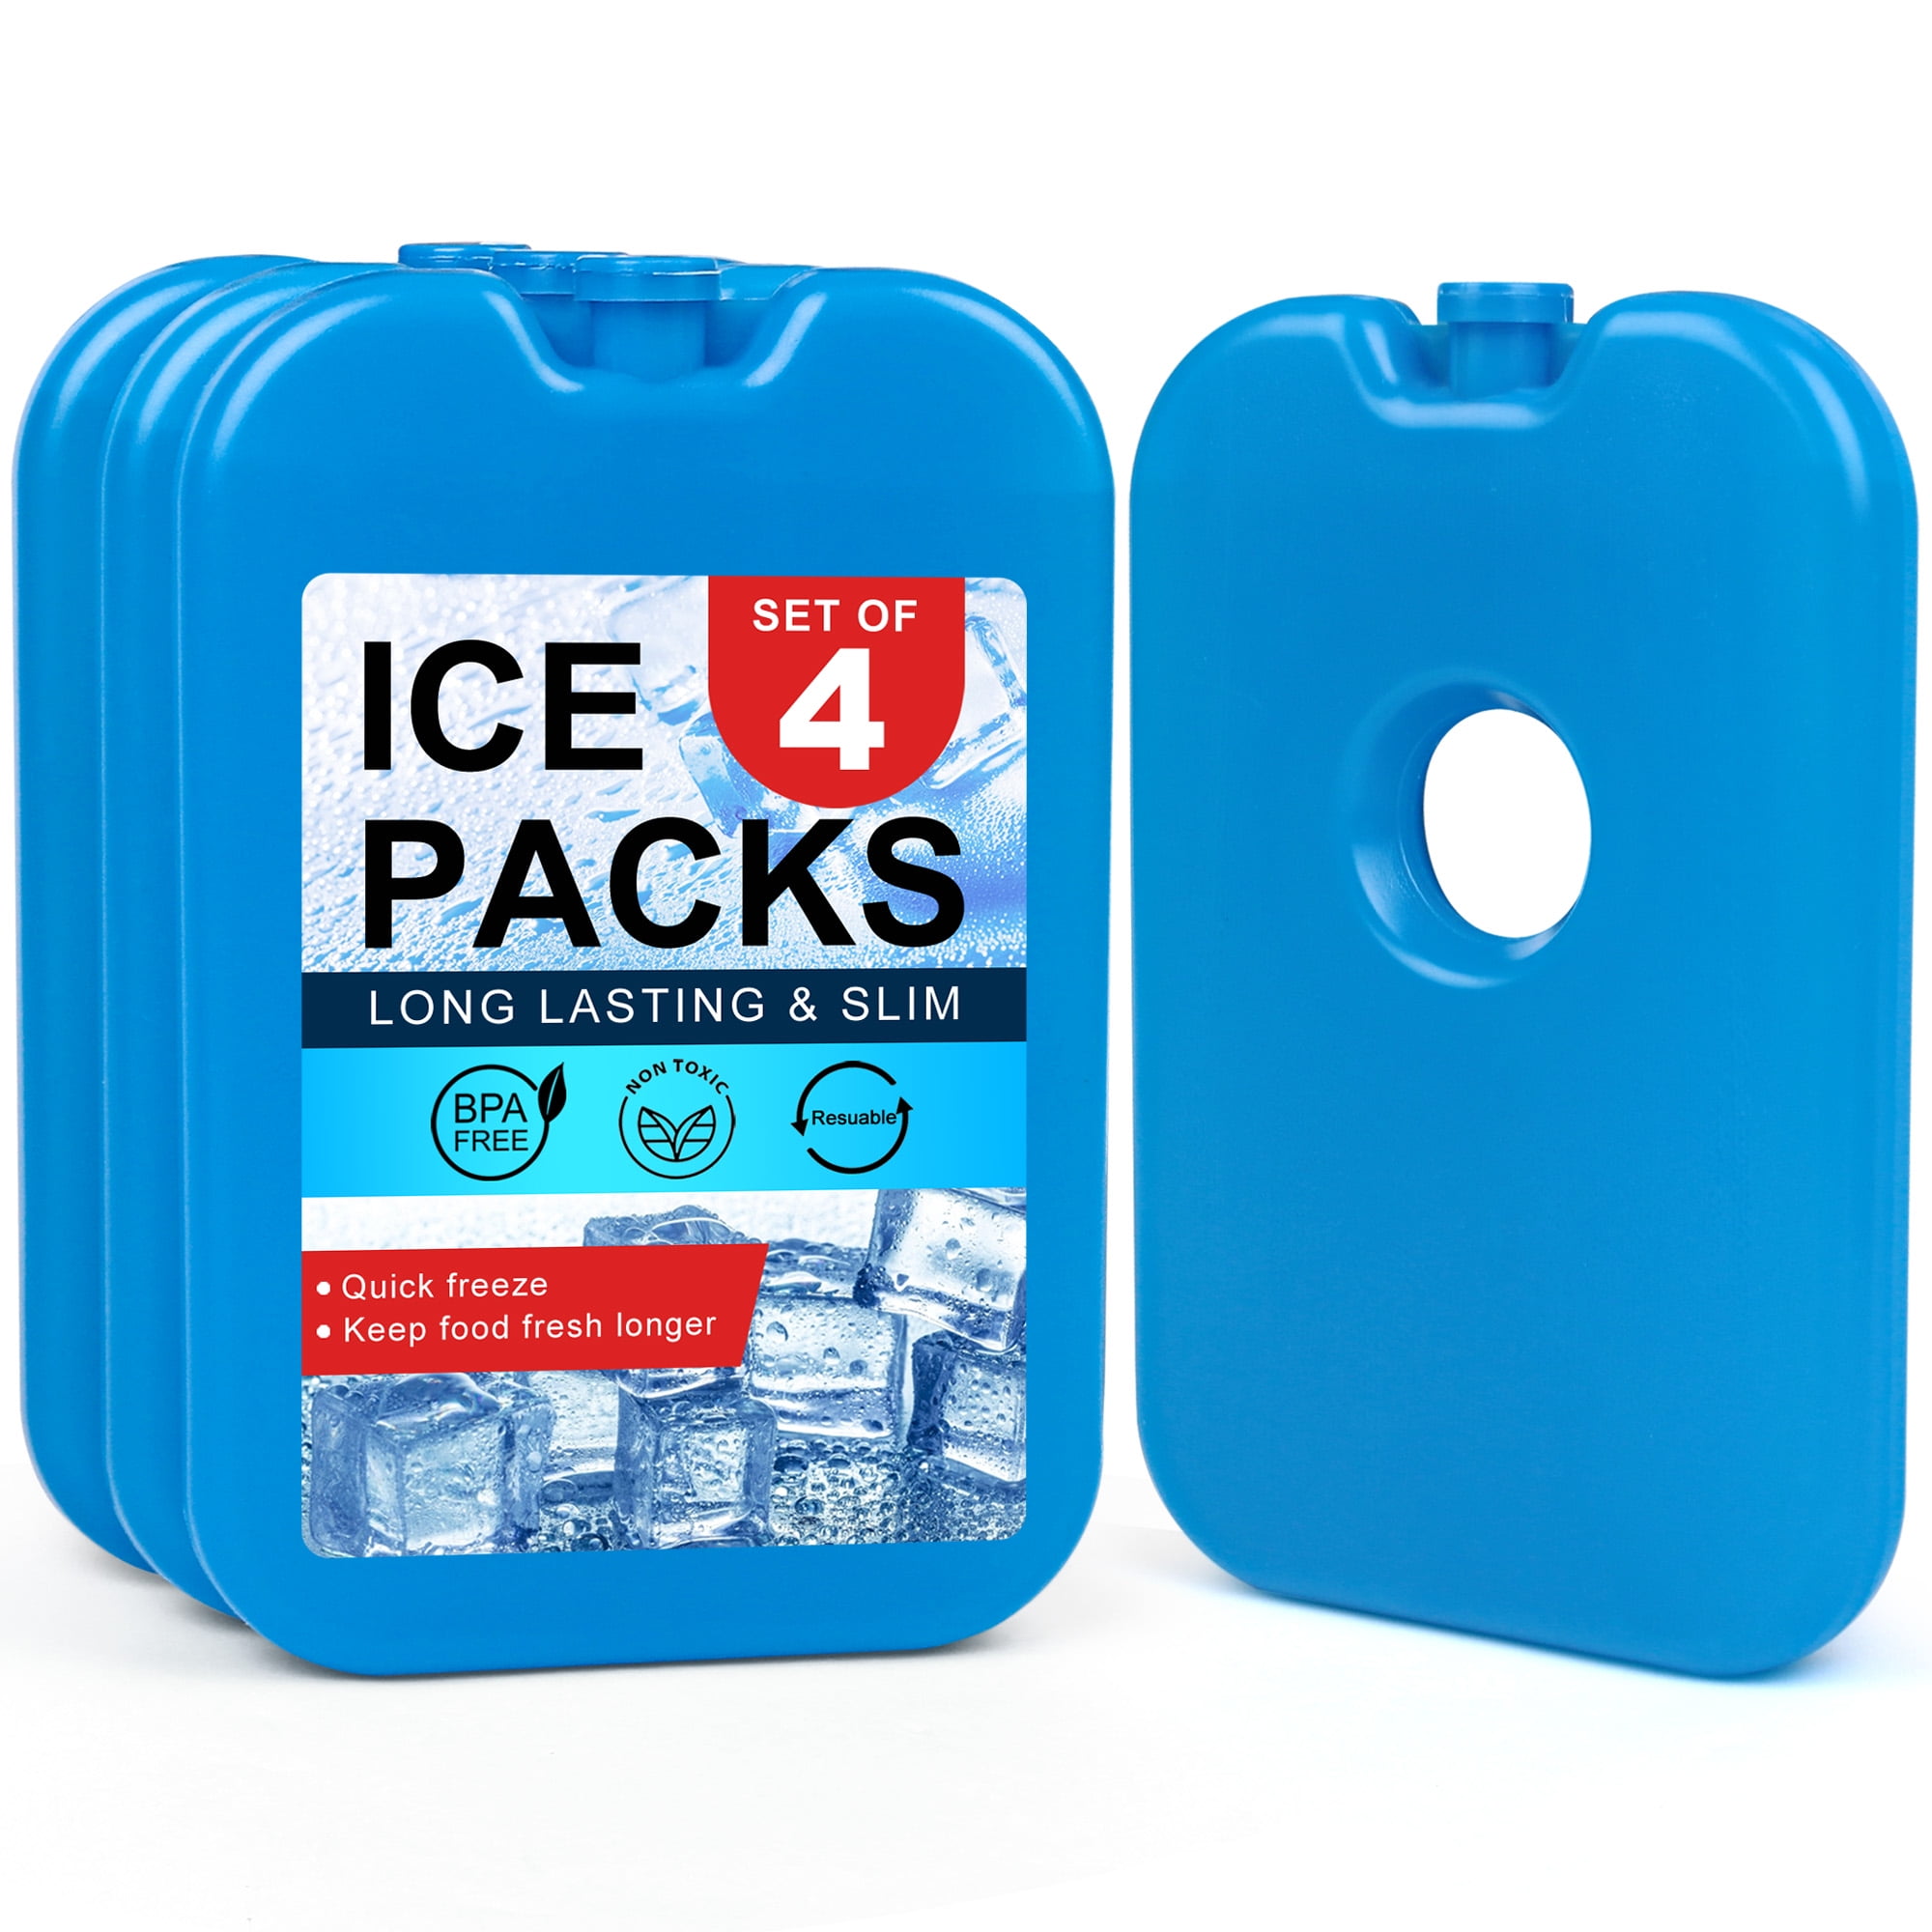  Cerbonny Ice Packs For Lunch Bags,Ice Packs For Lunch Boxes,Ice  Packs For Cooler,Ice Pack For Lunch Box,Lunch Box Ice Packs,Freezer Packs  for kids' lunchbox,Lunch Box Ice Packs Reusable(Mermaid): Home & Kitchen